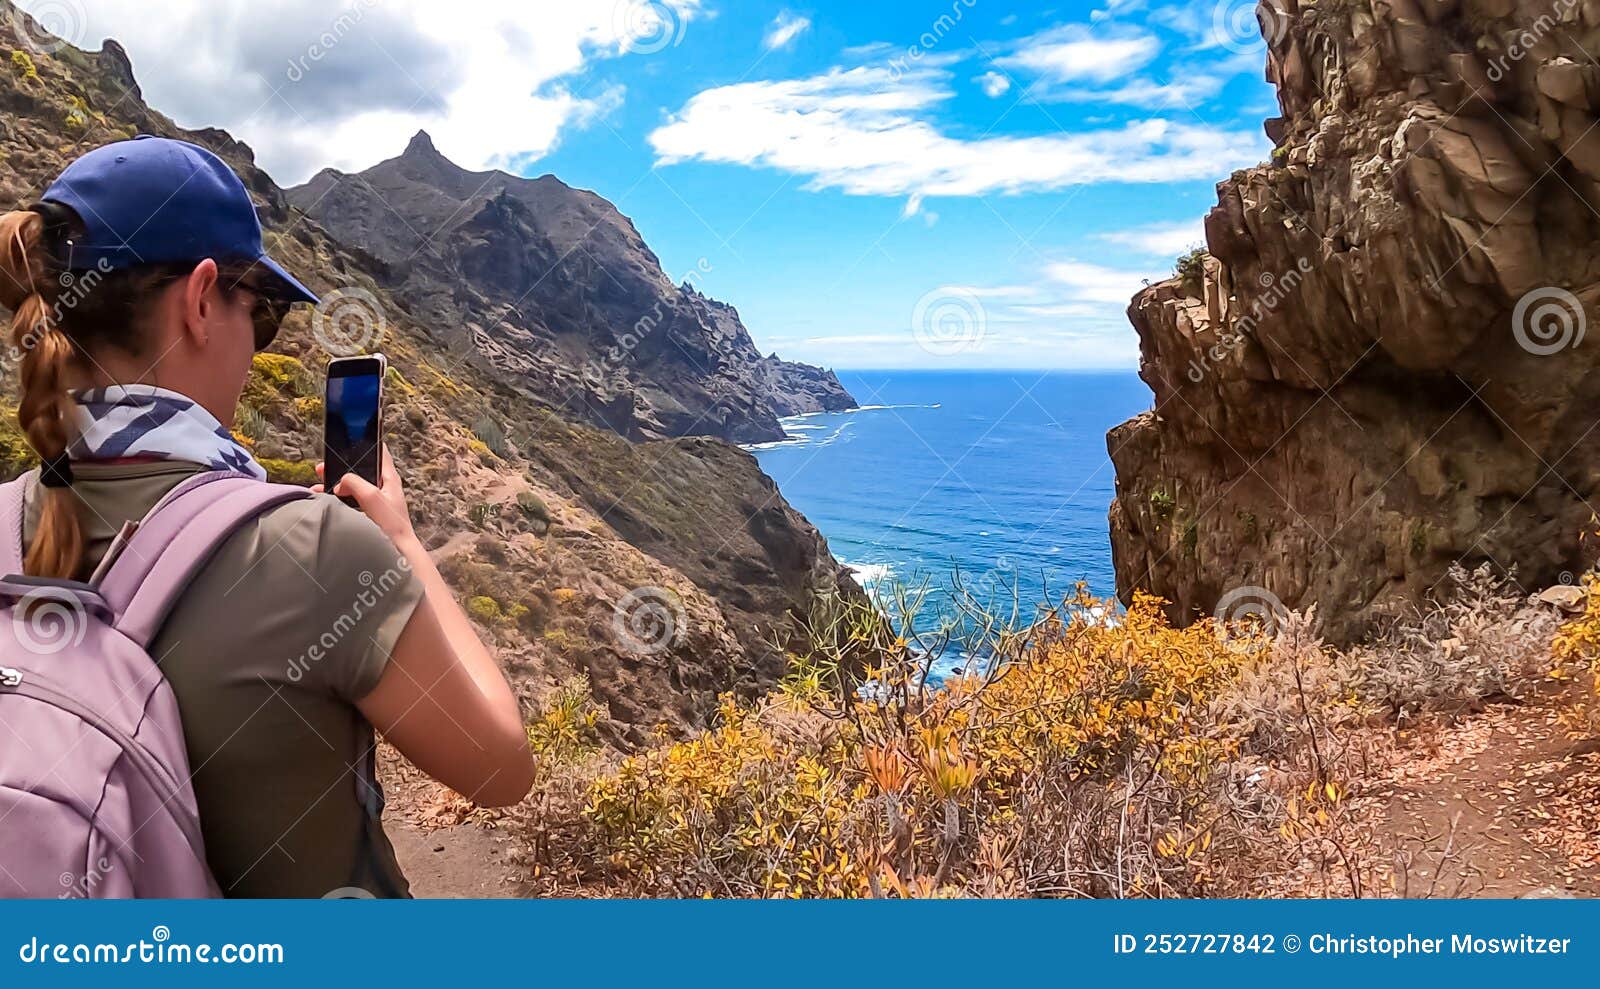 hiking woman taking picture of scenic view of coastline of anaga mountain range on tenerife, canary islands, spain, europe